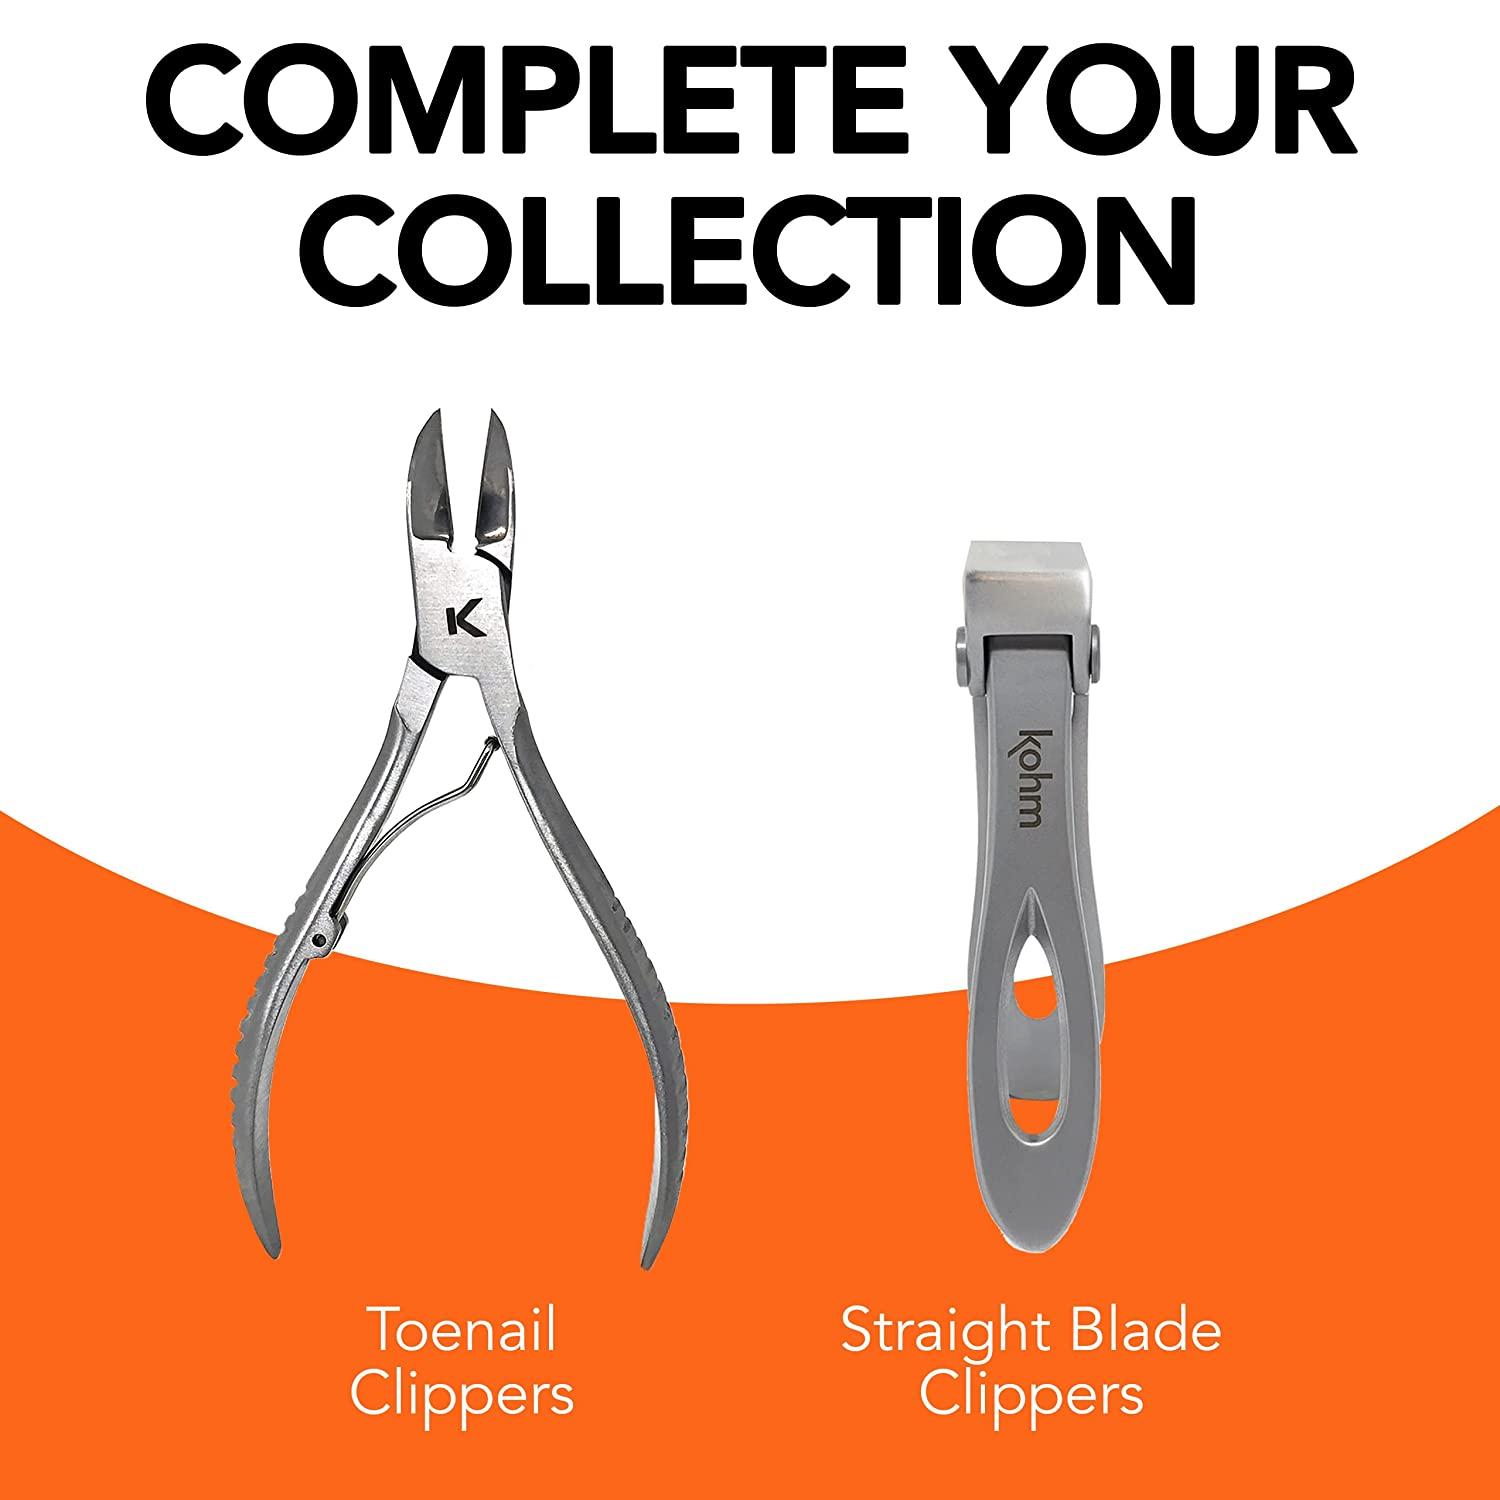 KOHM Nail Clippers For Thick Nails - Heavy Duty, Wide Mouth Professional  Fingernail And Toenail Clippers For Men, Women & Seniors, Silver